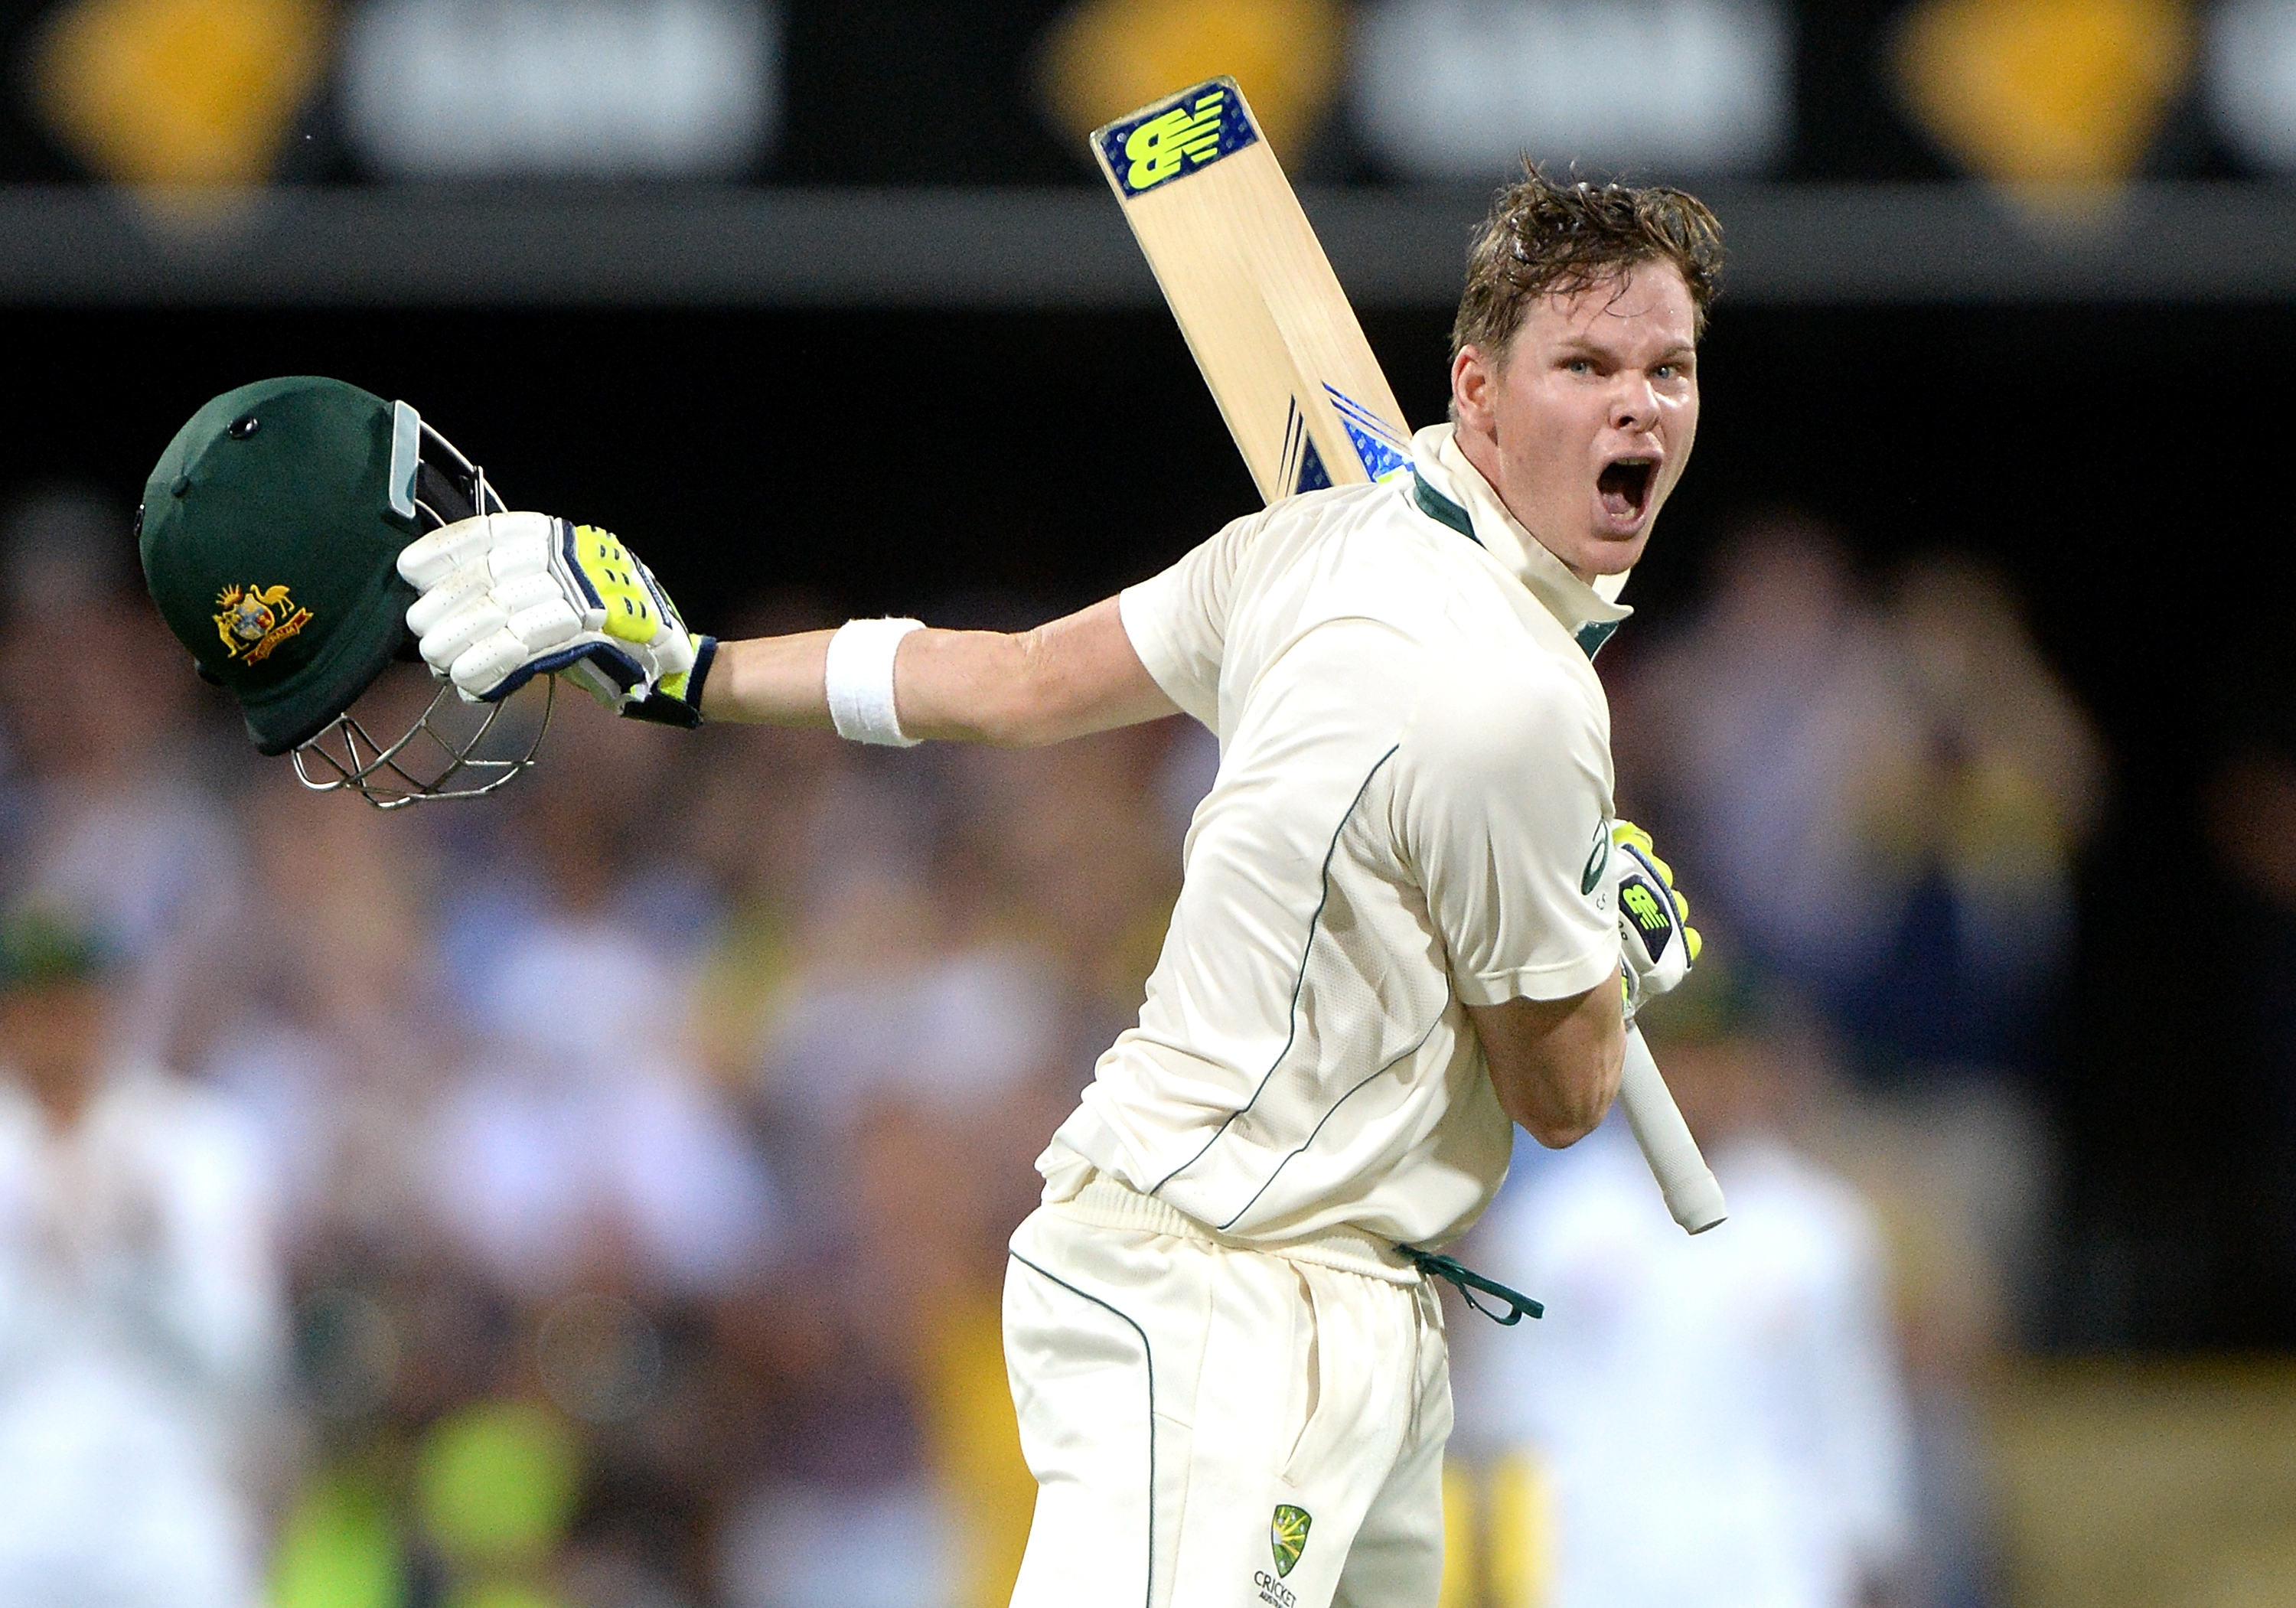 Chance beckons for Steve Smith to build an indelible legacy on Test comeback